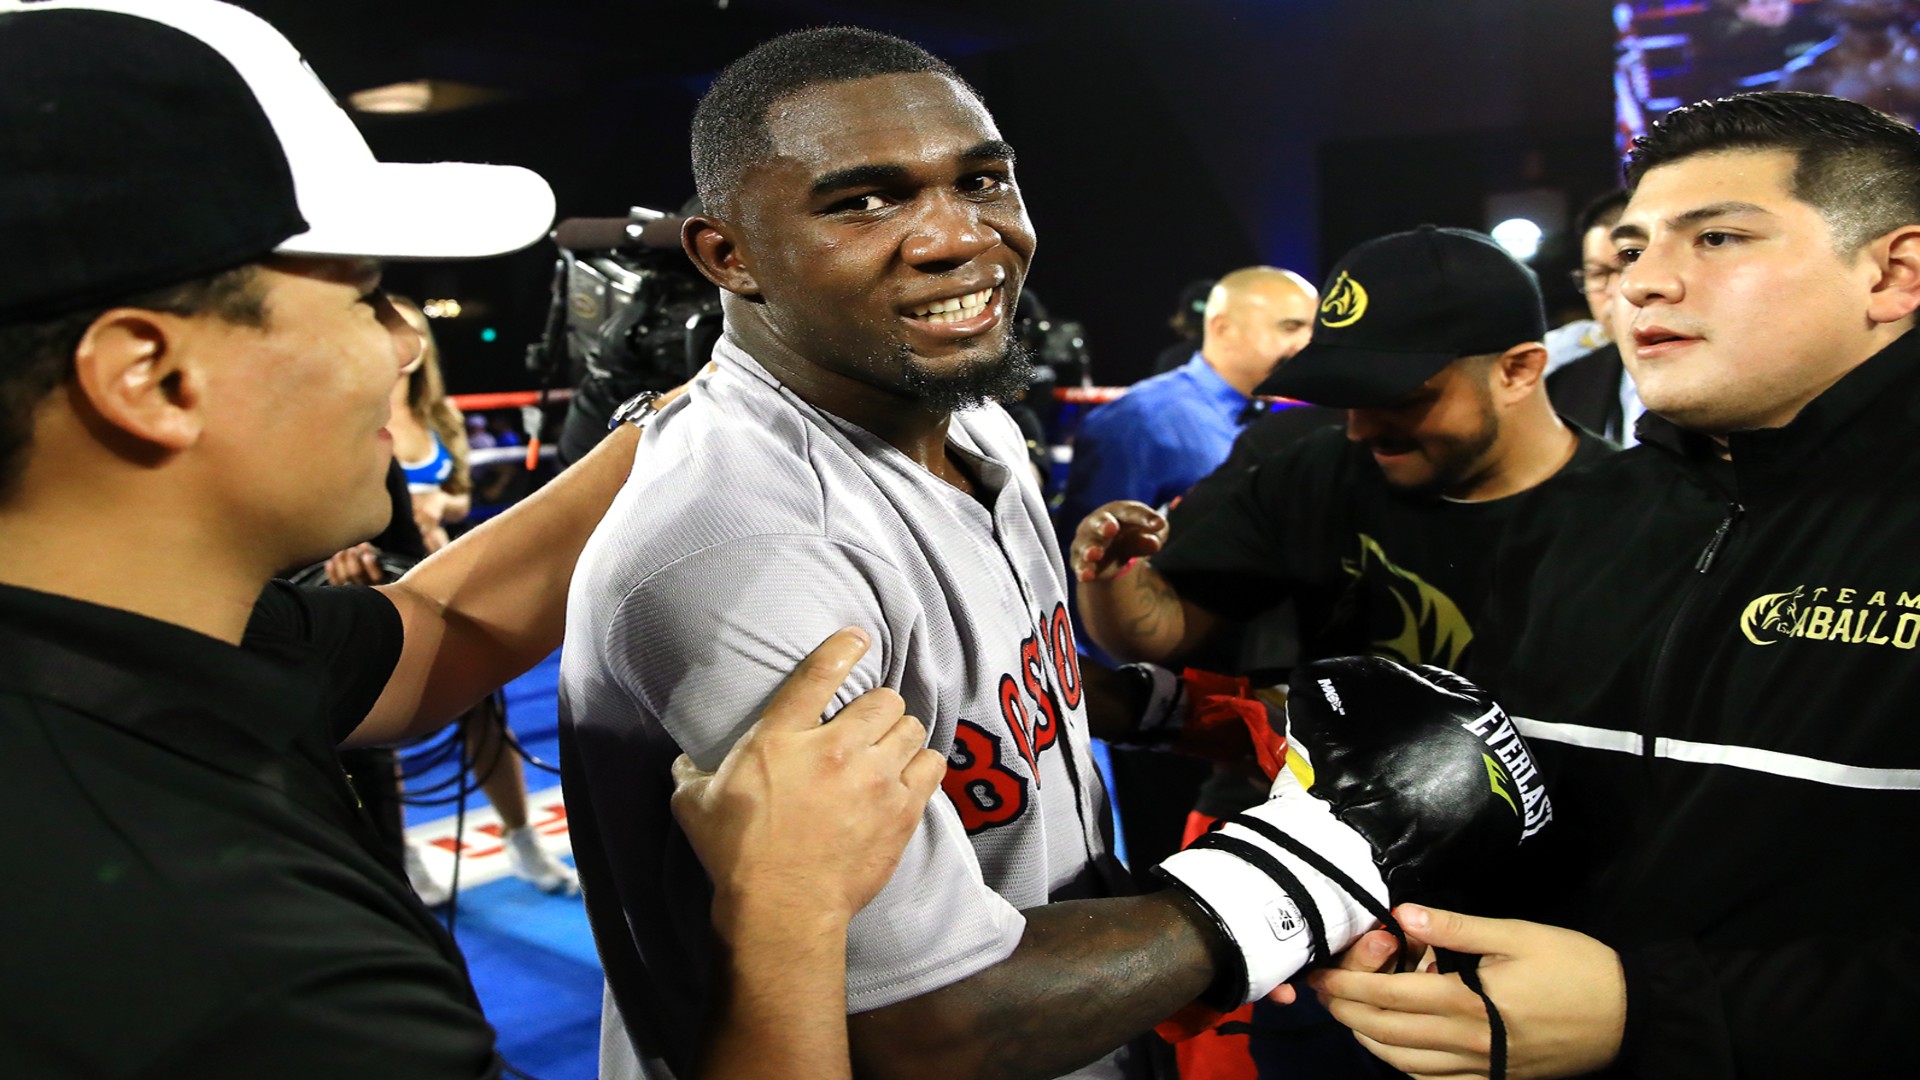 Carlos Adames puts Dominican boxing on his back, sends message to U.S. tourists ...1920 x 1080